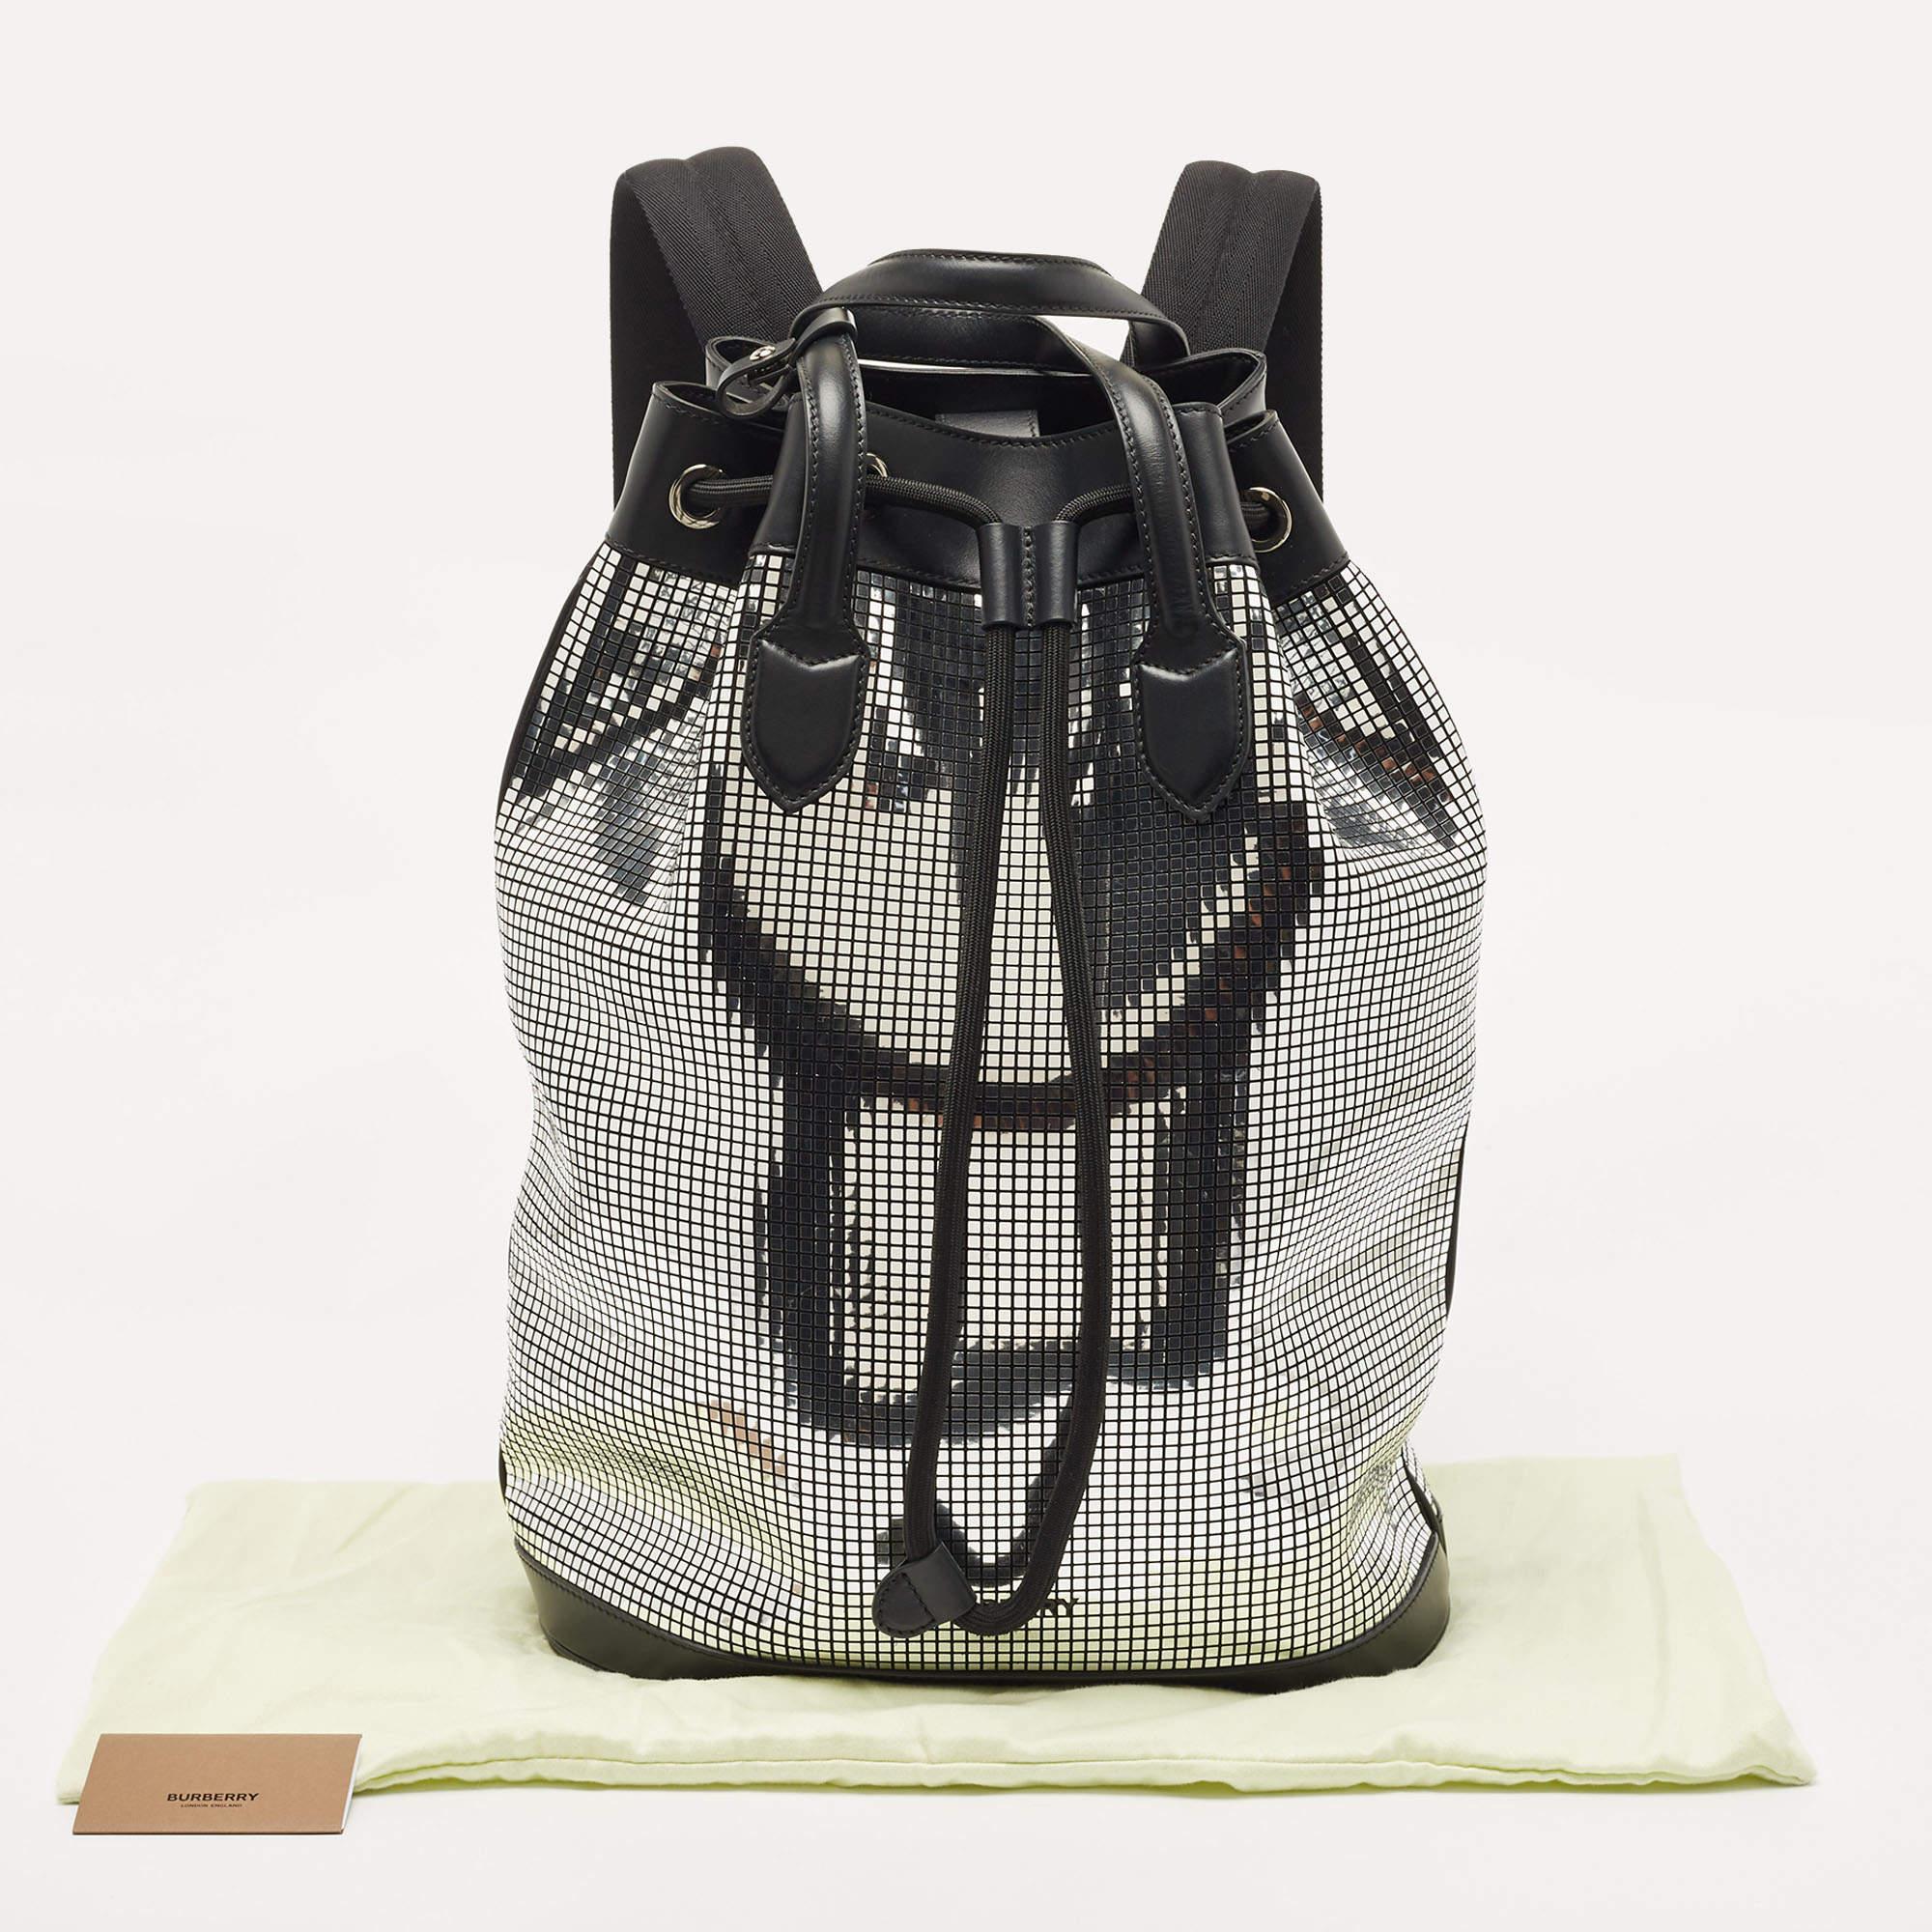 Burberry Black/Silver Mirror Effect and Suede Drawstring Backpack 1